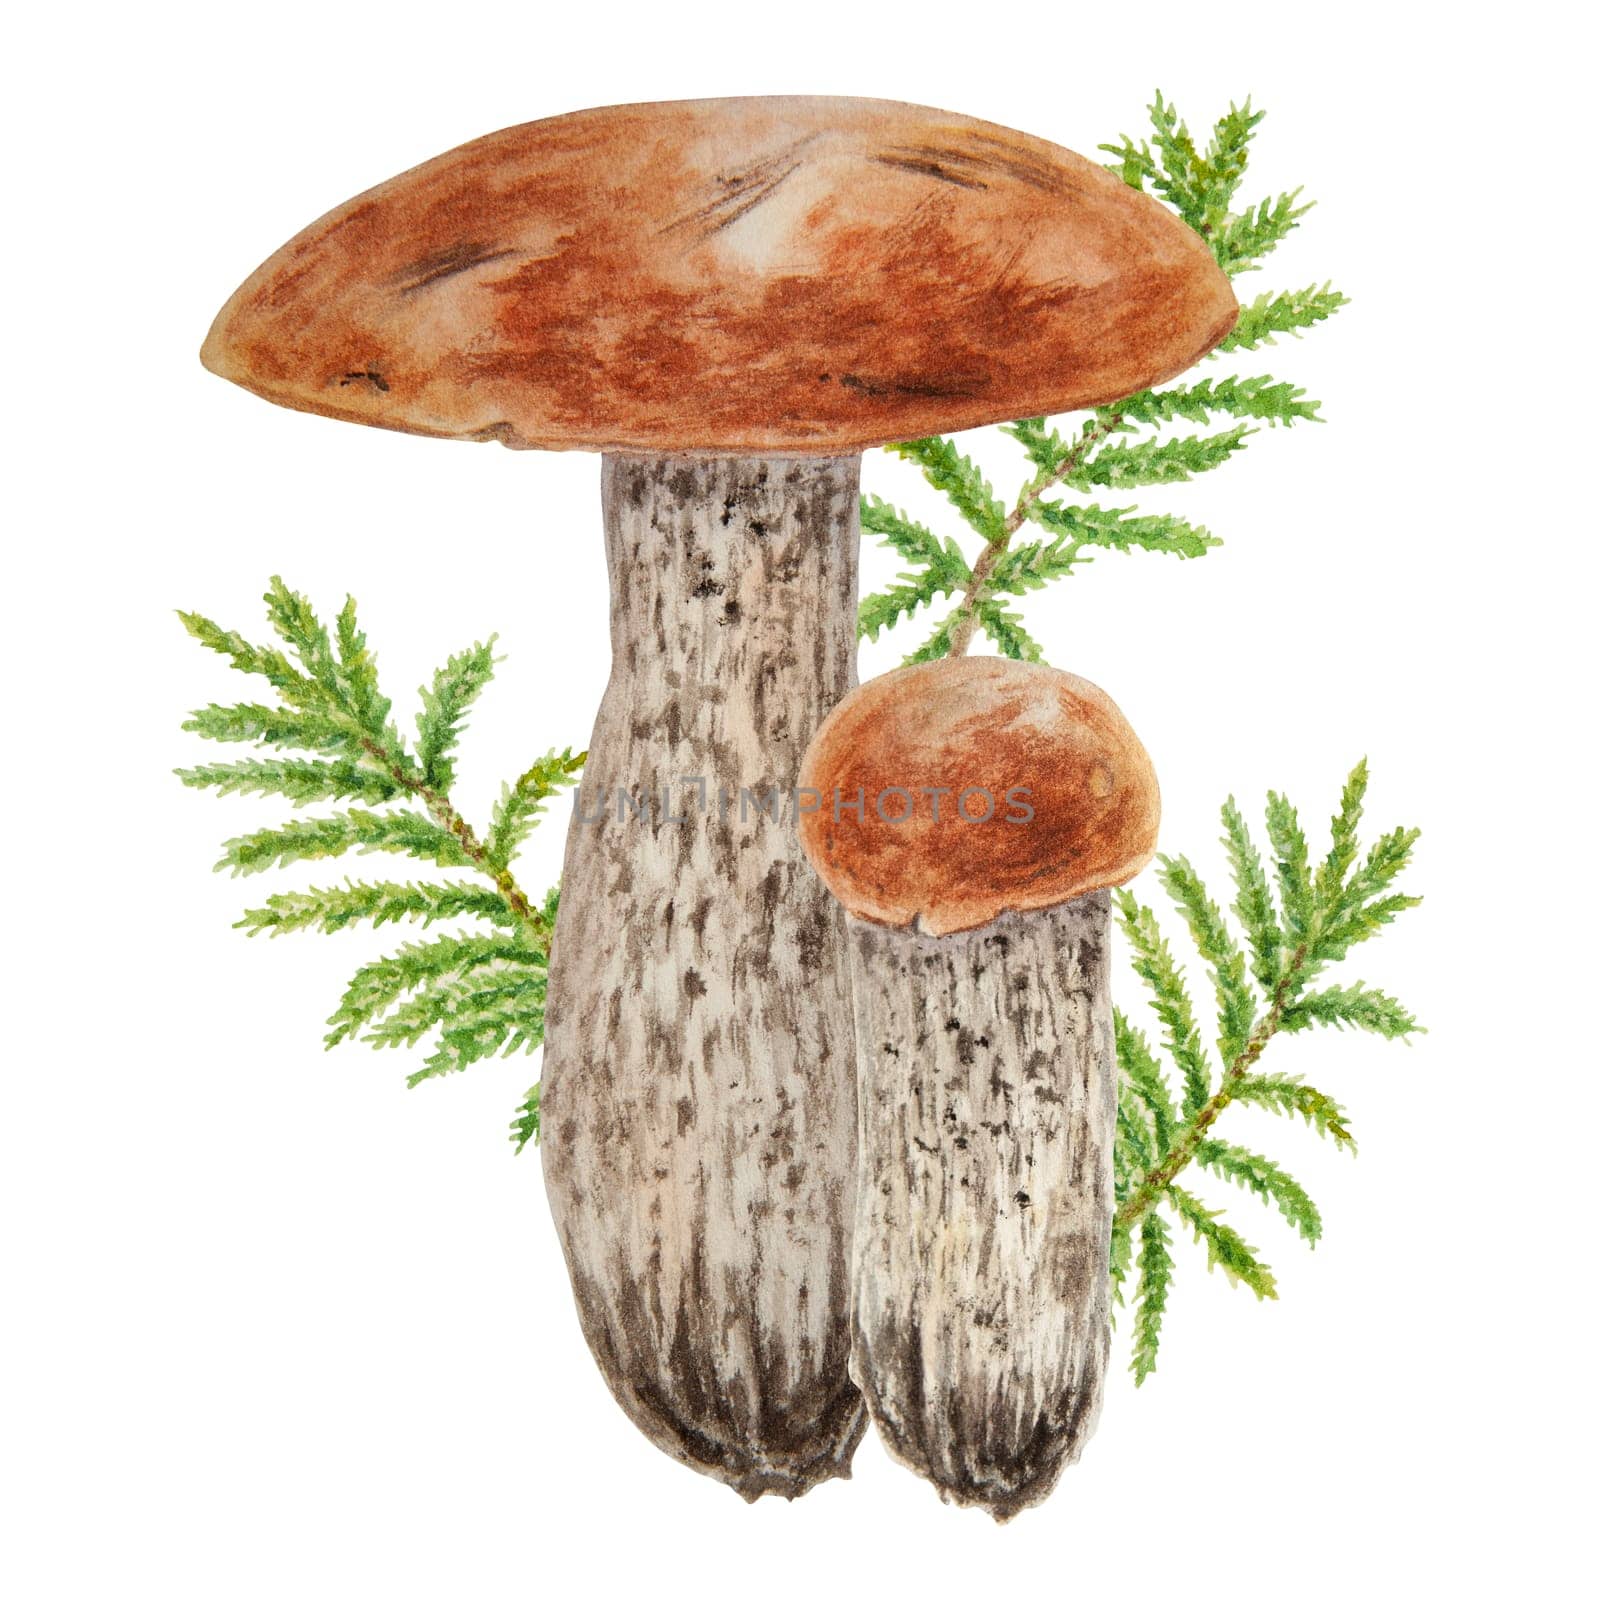 Wild mushrooms and moss watercolor hand drawn botanical realistic illustration. Forest boletus isolated on white background. Great for printing on fabric, postcards, invitations, menus, book of recipes